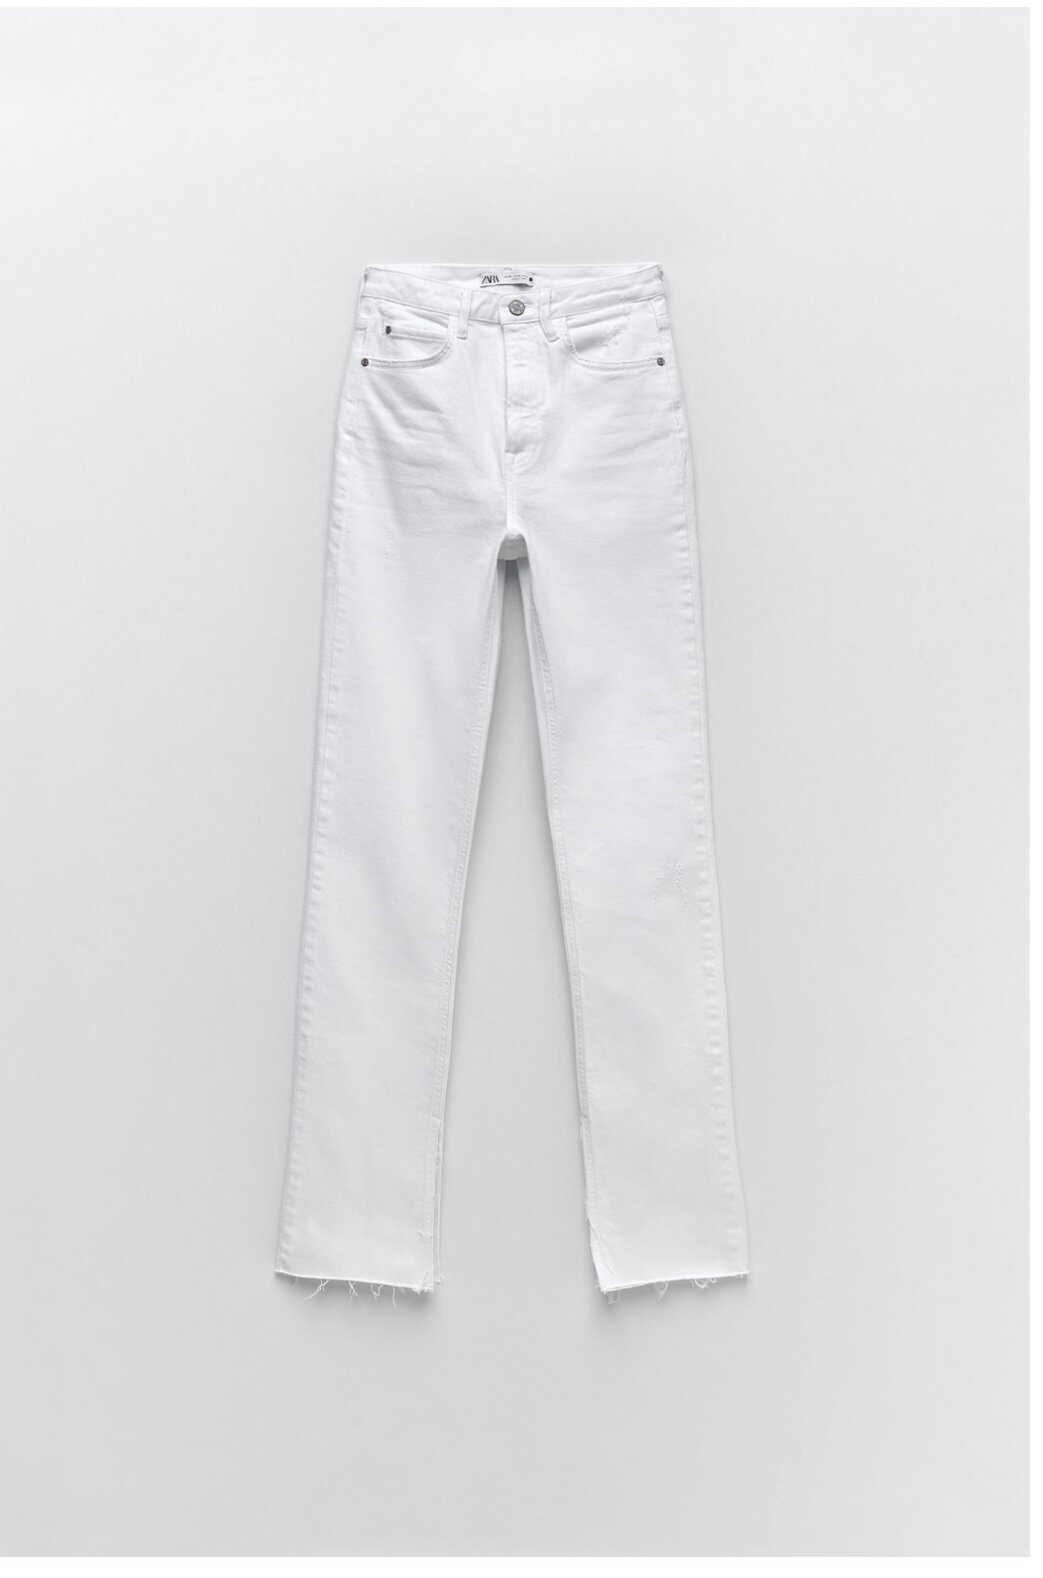 High Rise Slim Flare Jeans